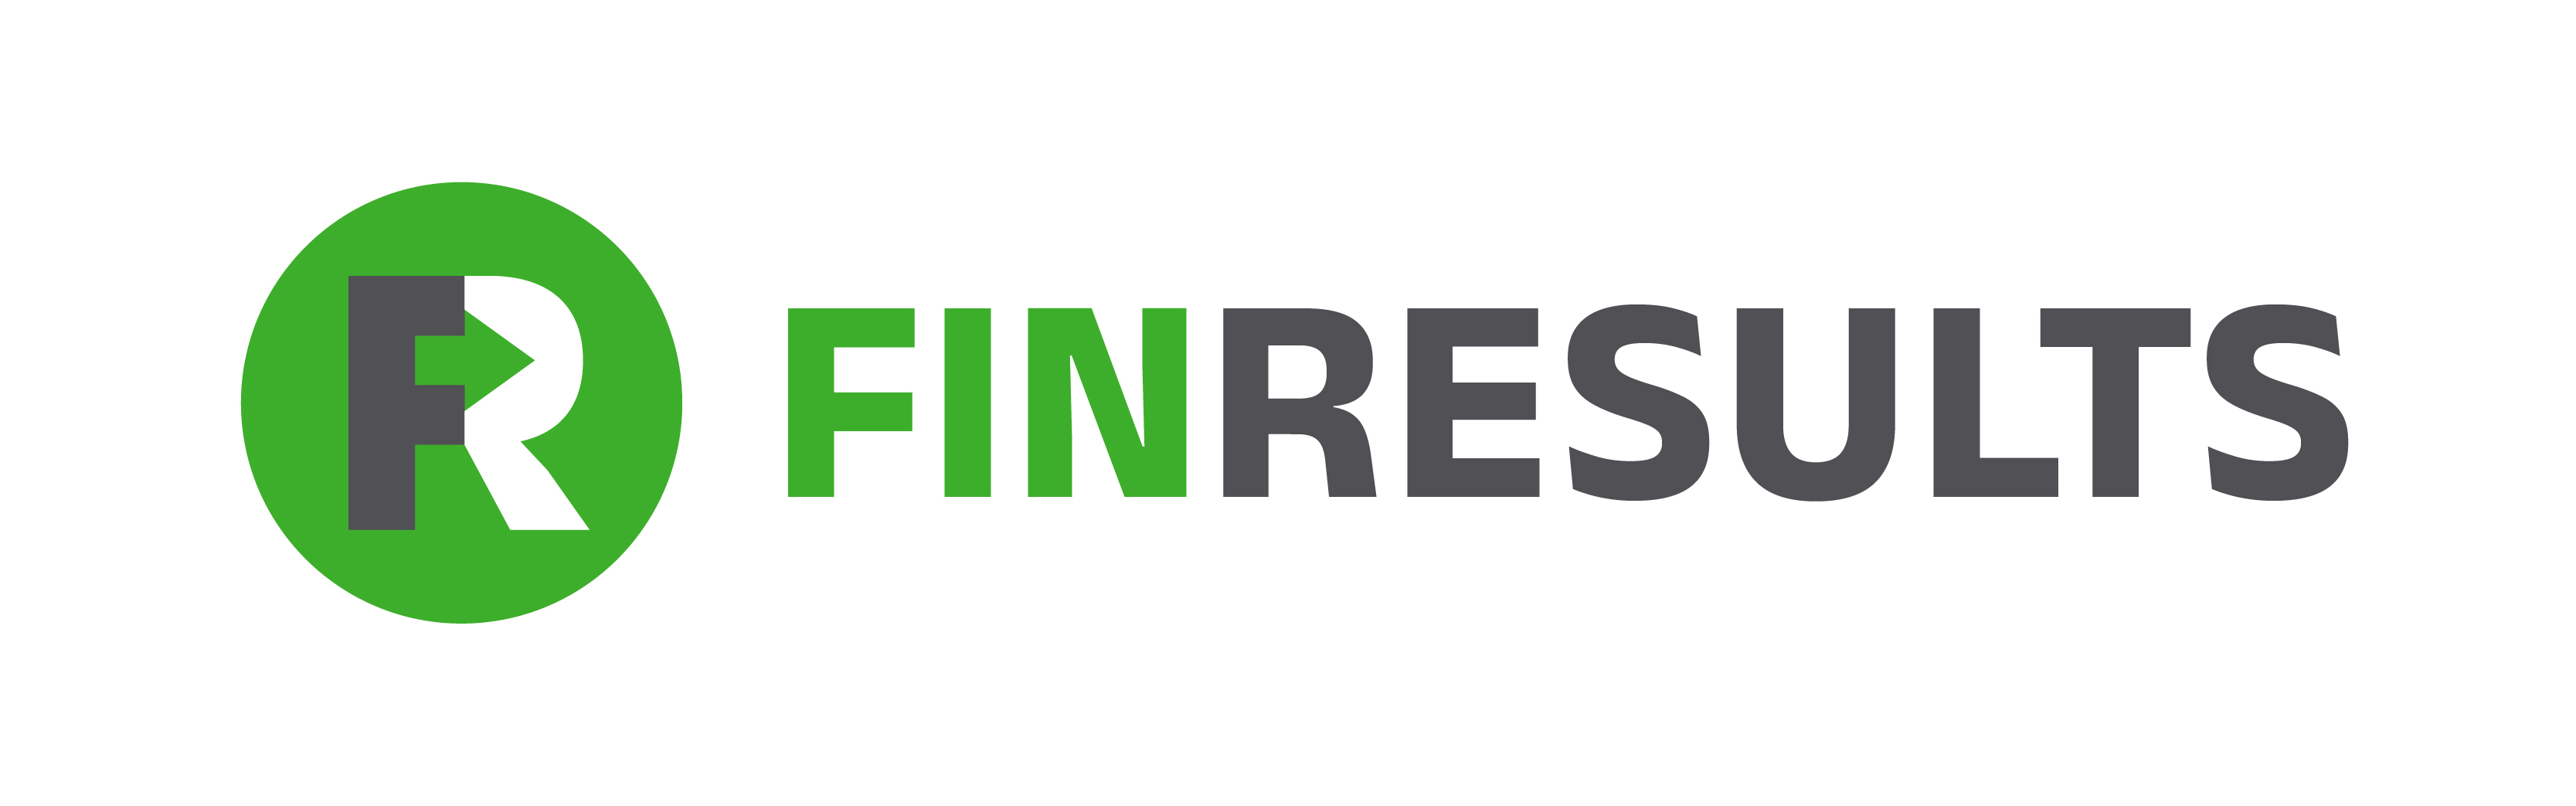 FinResults, Inc.